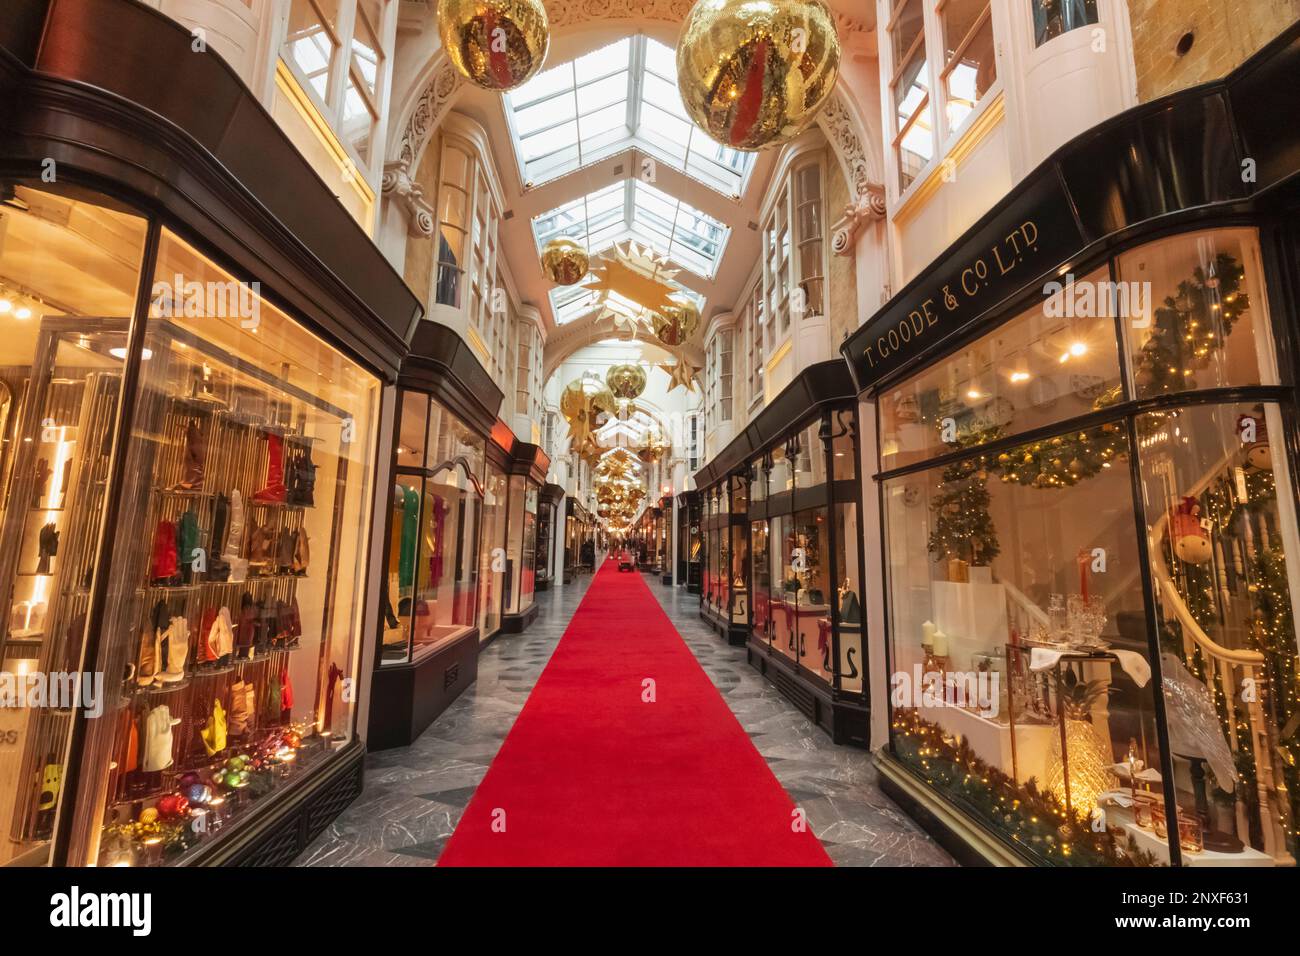 England, London, Piccadilly, The Burlington Arcade with Christmas Decorations Stock Photo